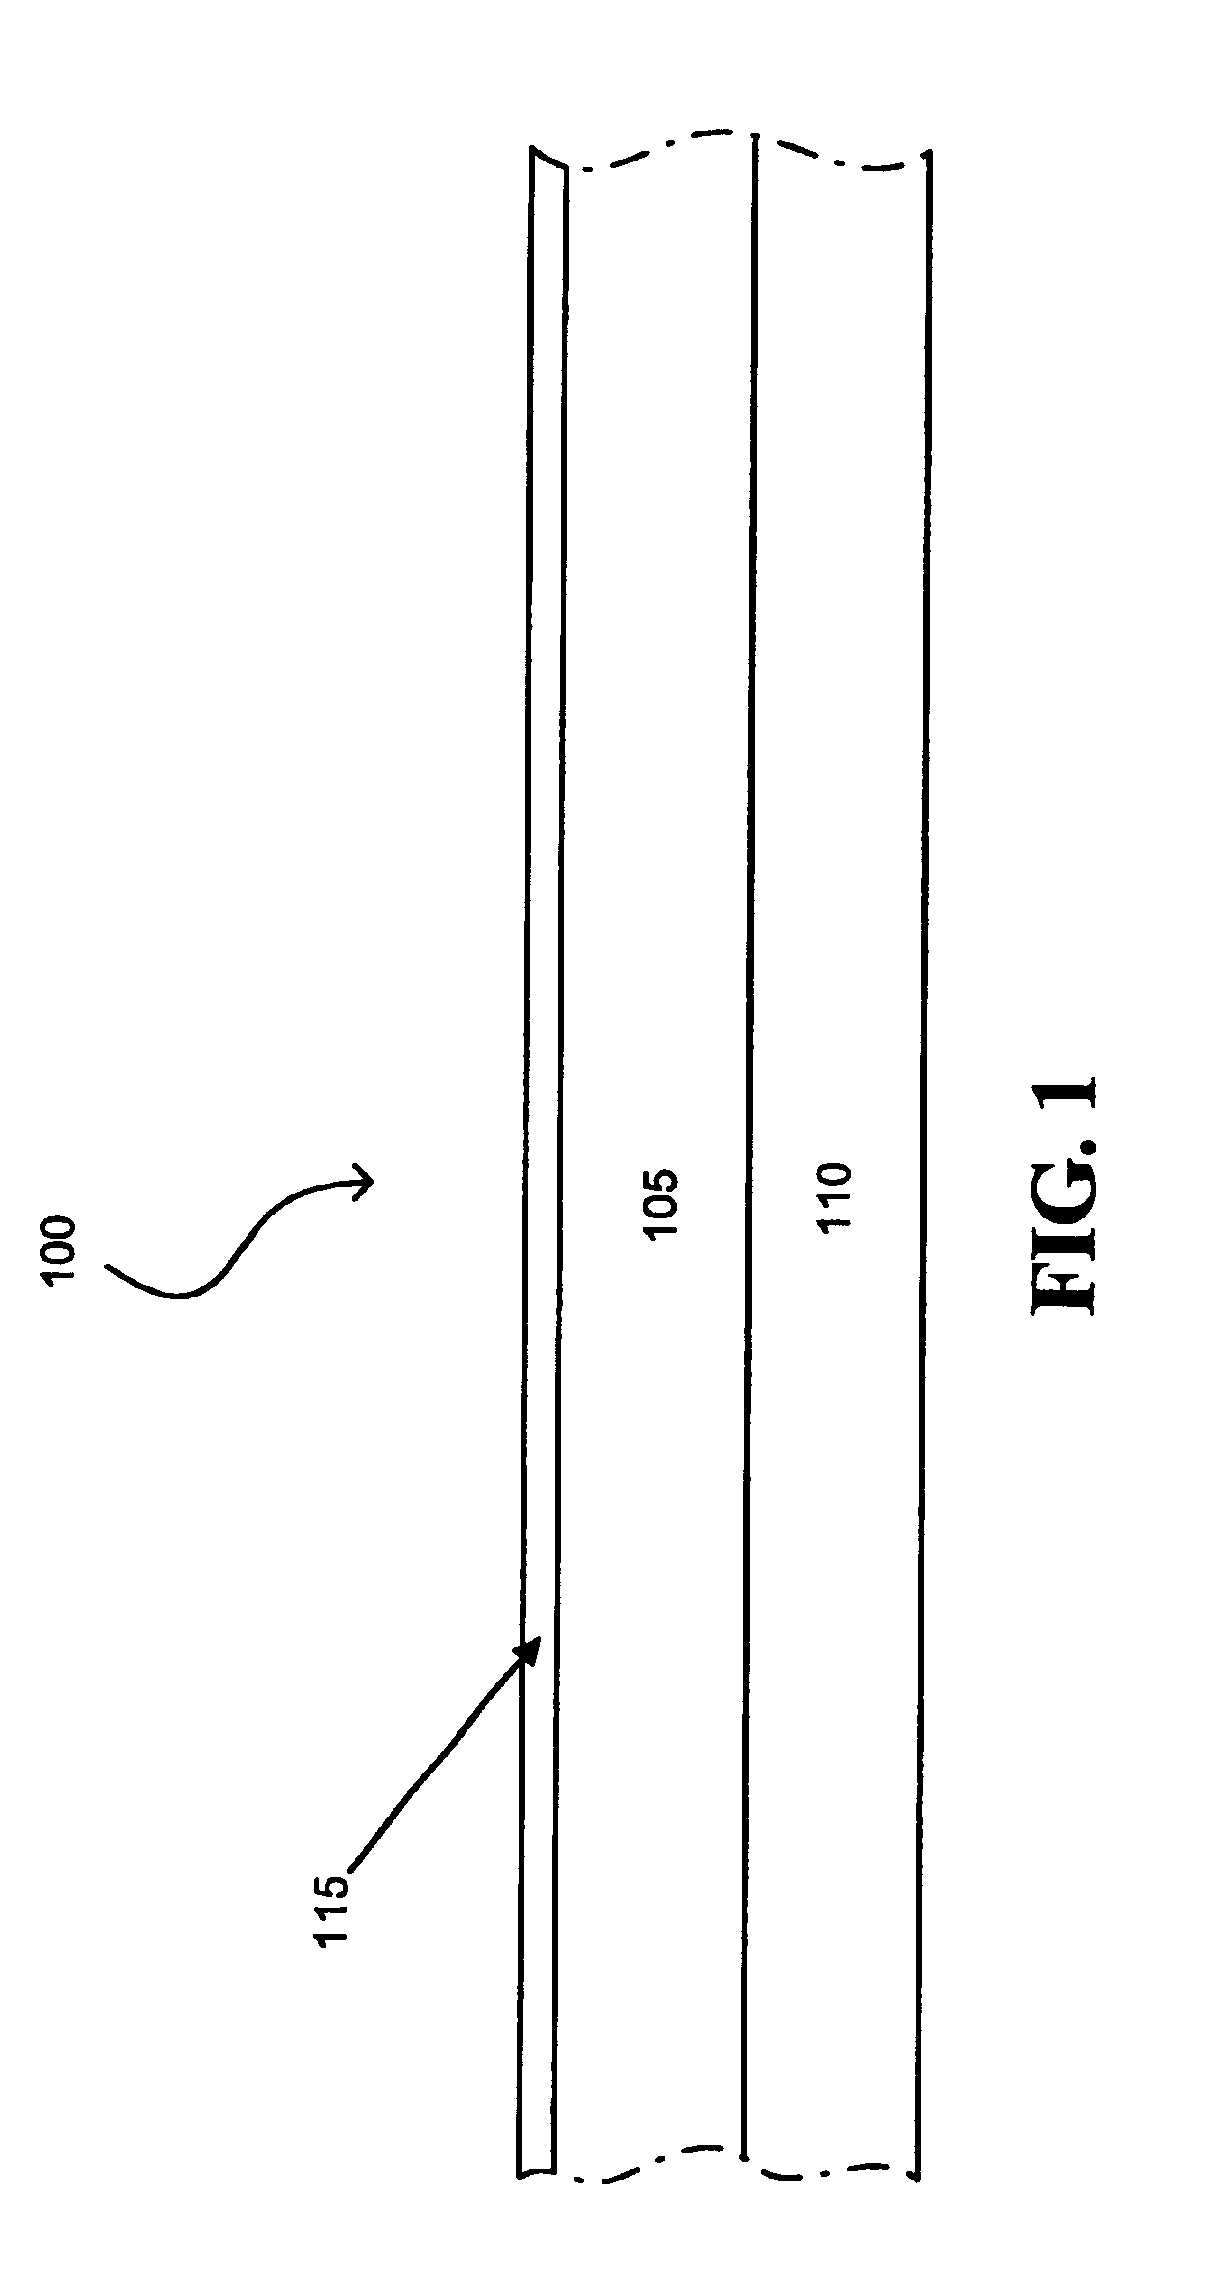 Method for forming tri-gate FinFET with mesa isolation